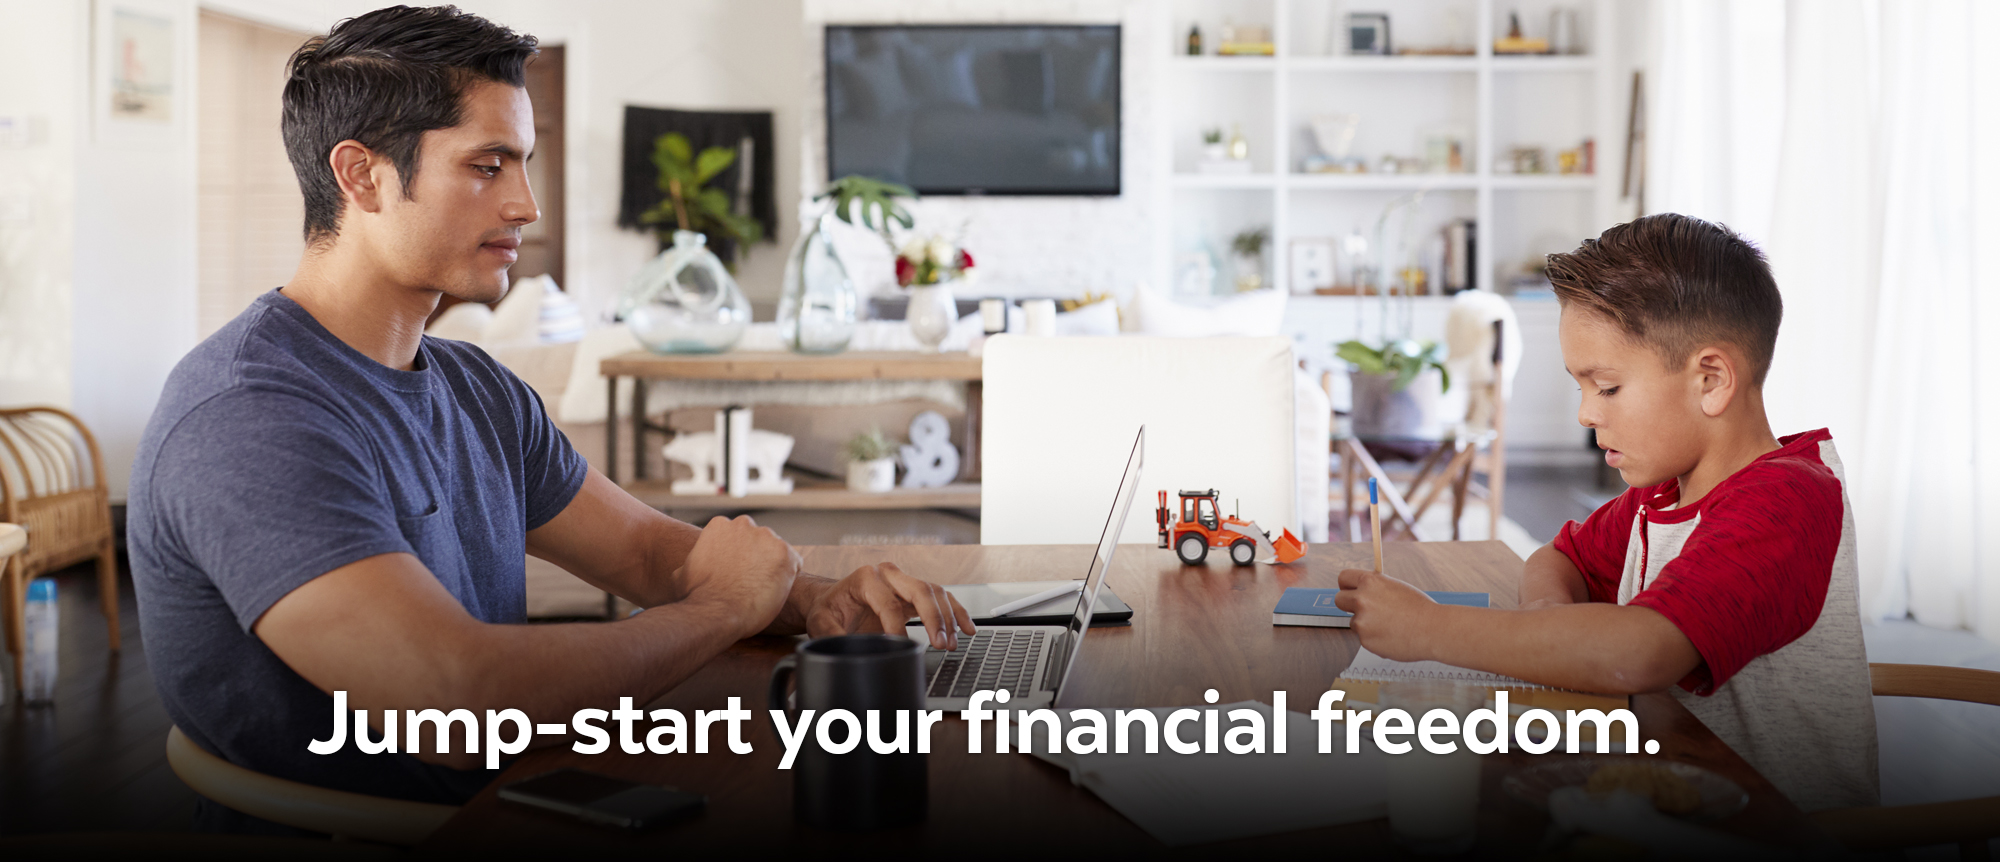 Jump-start your financial freedom